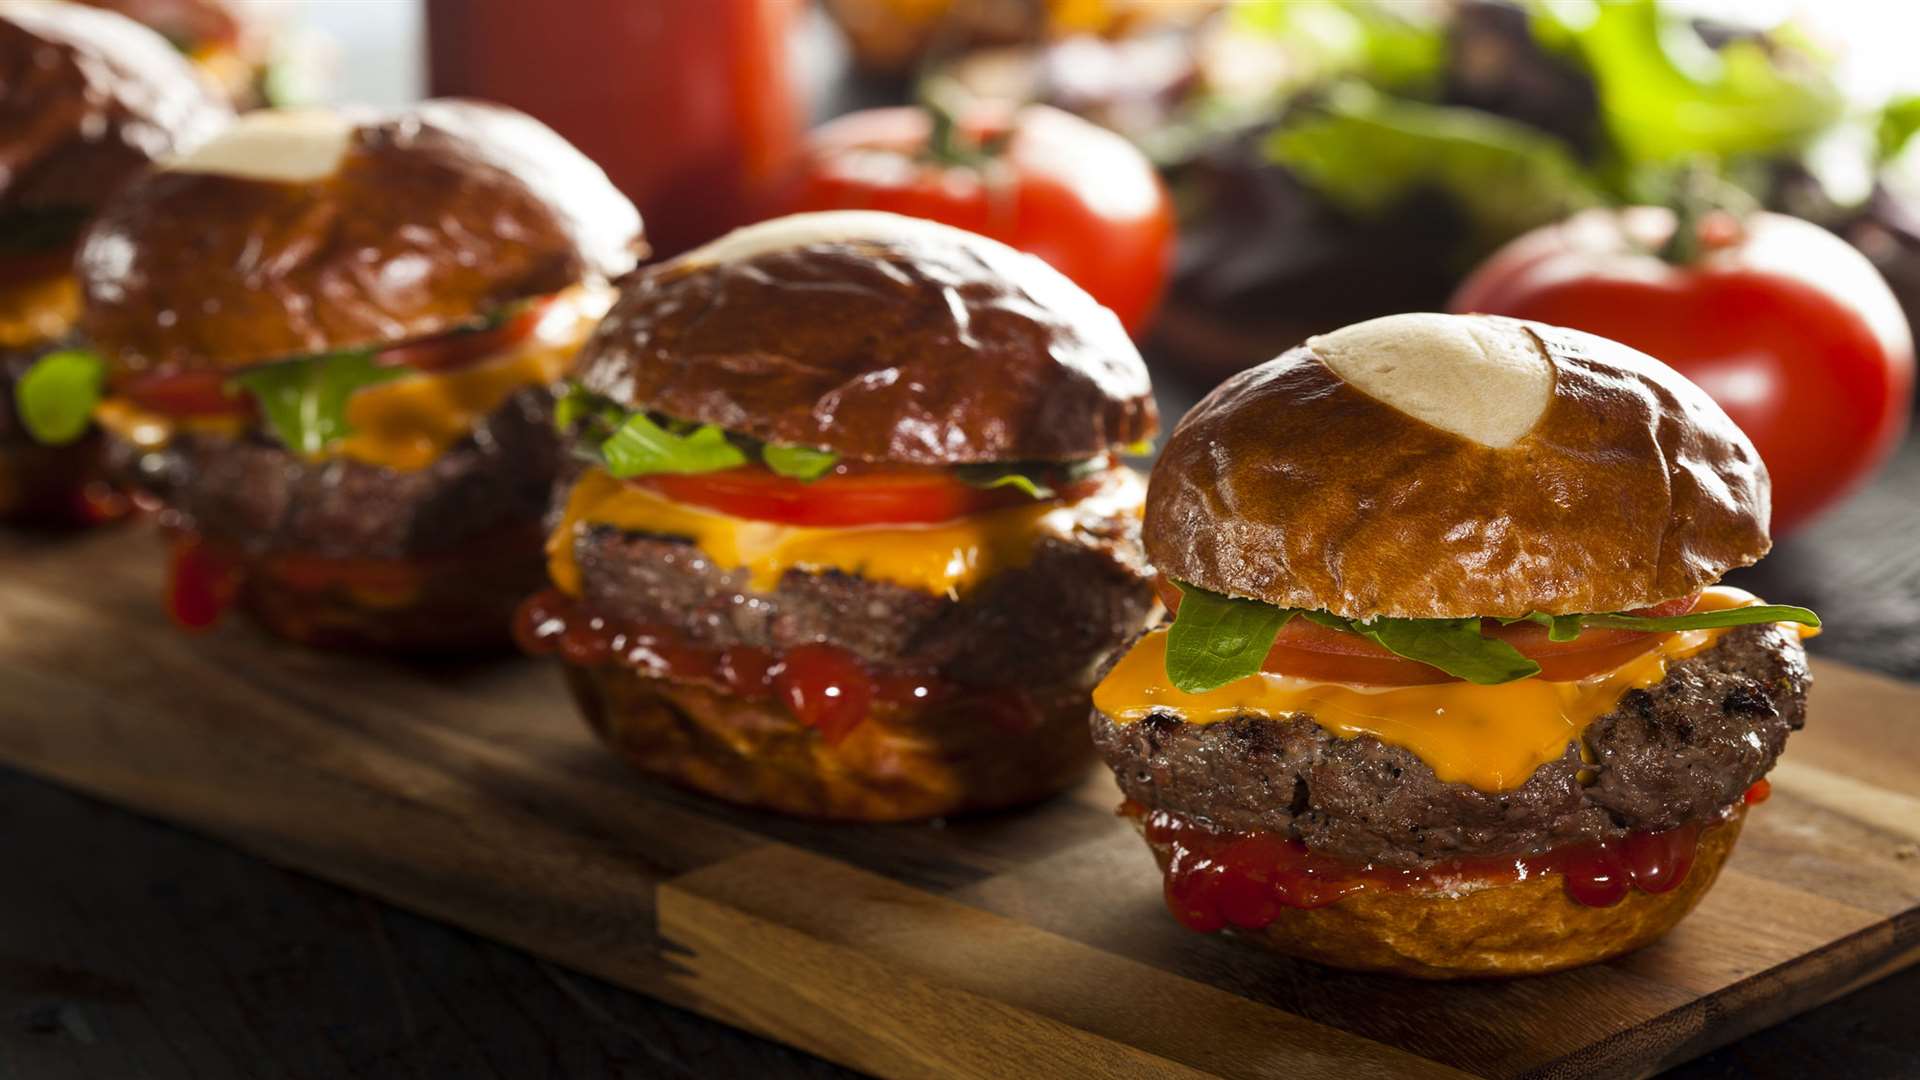 Gourmet burgers took fast food to a new level